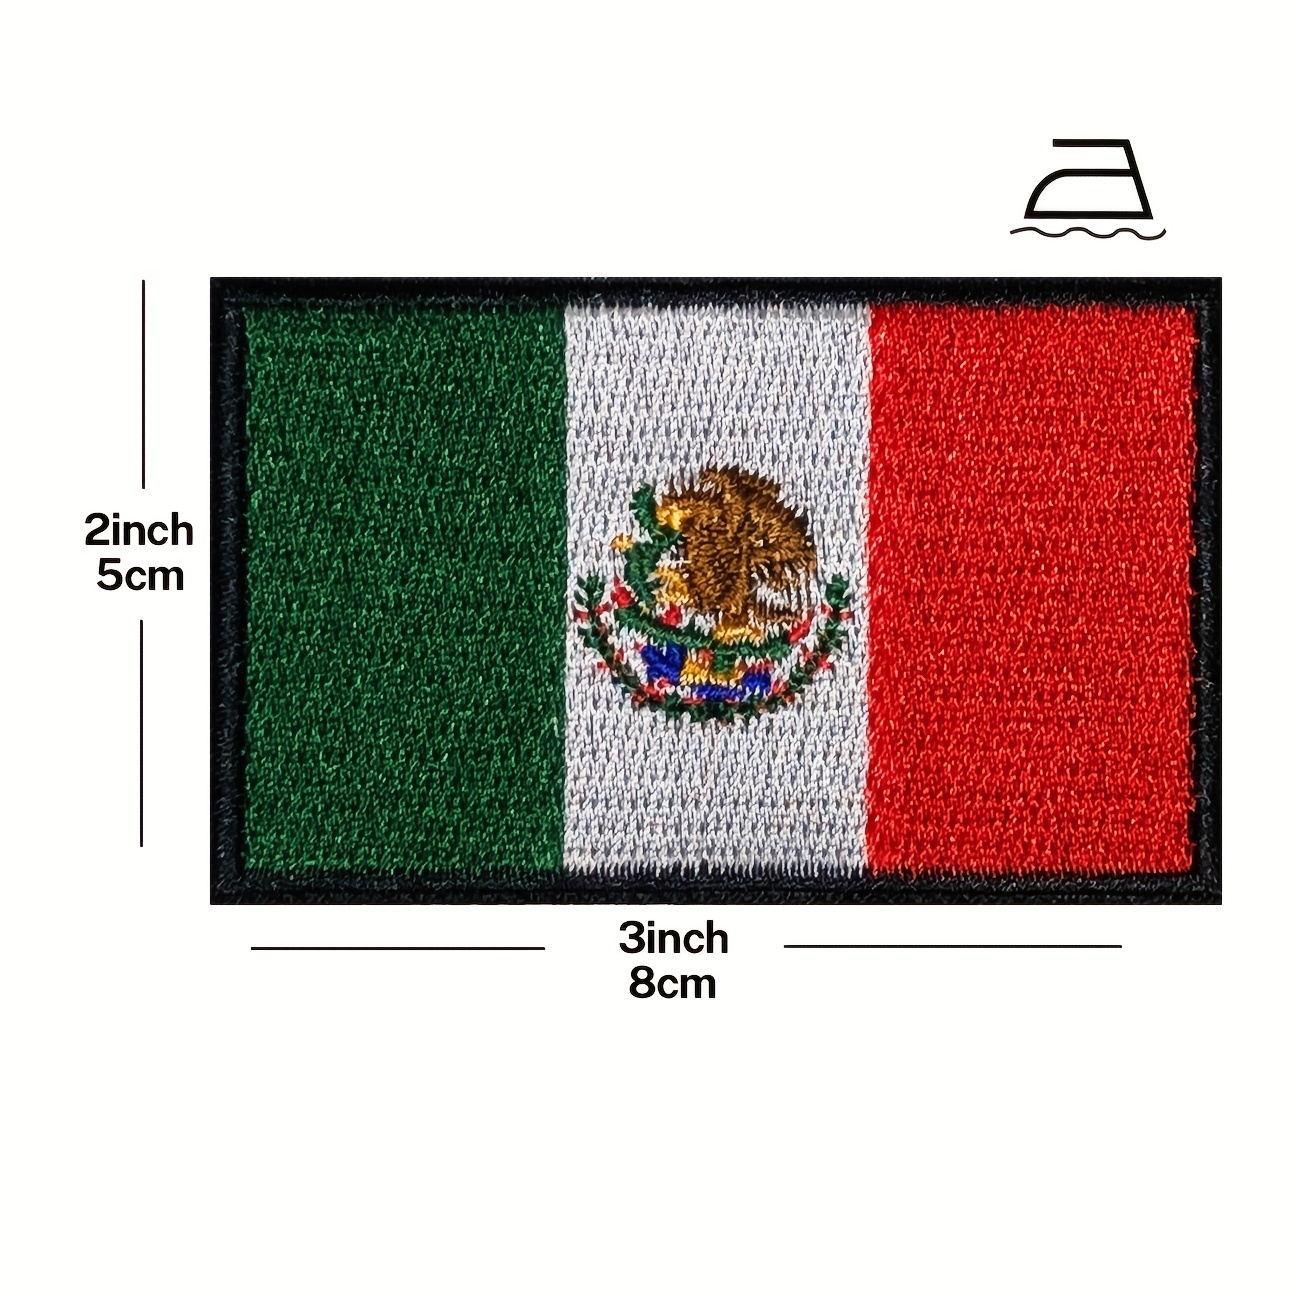 High Quality 2.5 x 2.5 Inch Shield Mexico Flag Embroidered Cloth Sew On  Iron On Cheap Mexico Emblem Patch with Golden Yellow Border